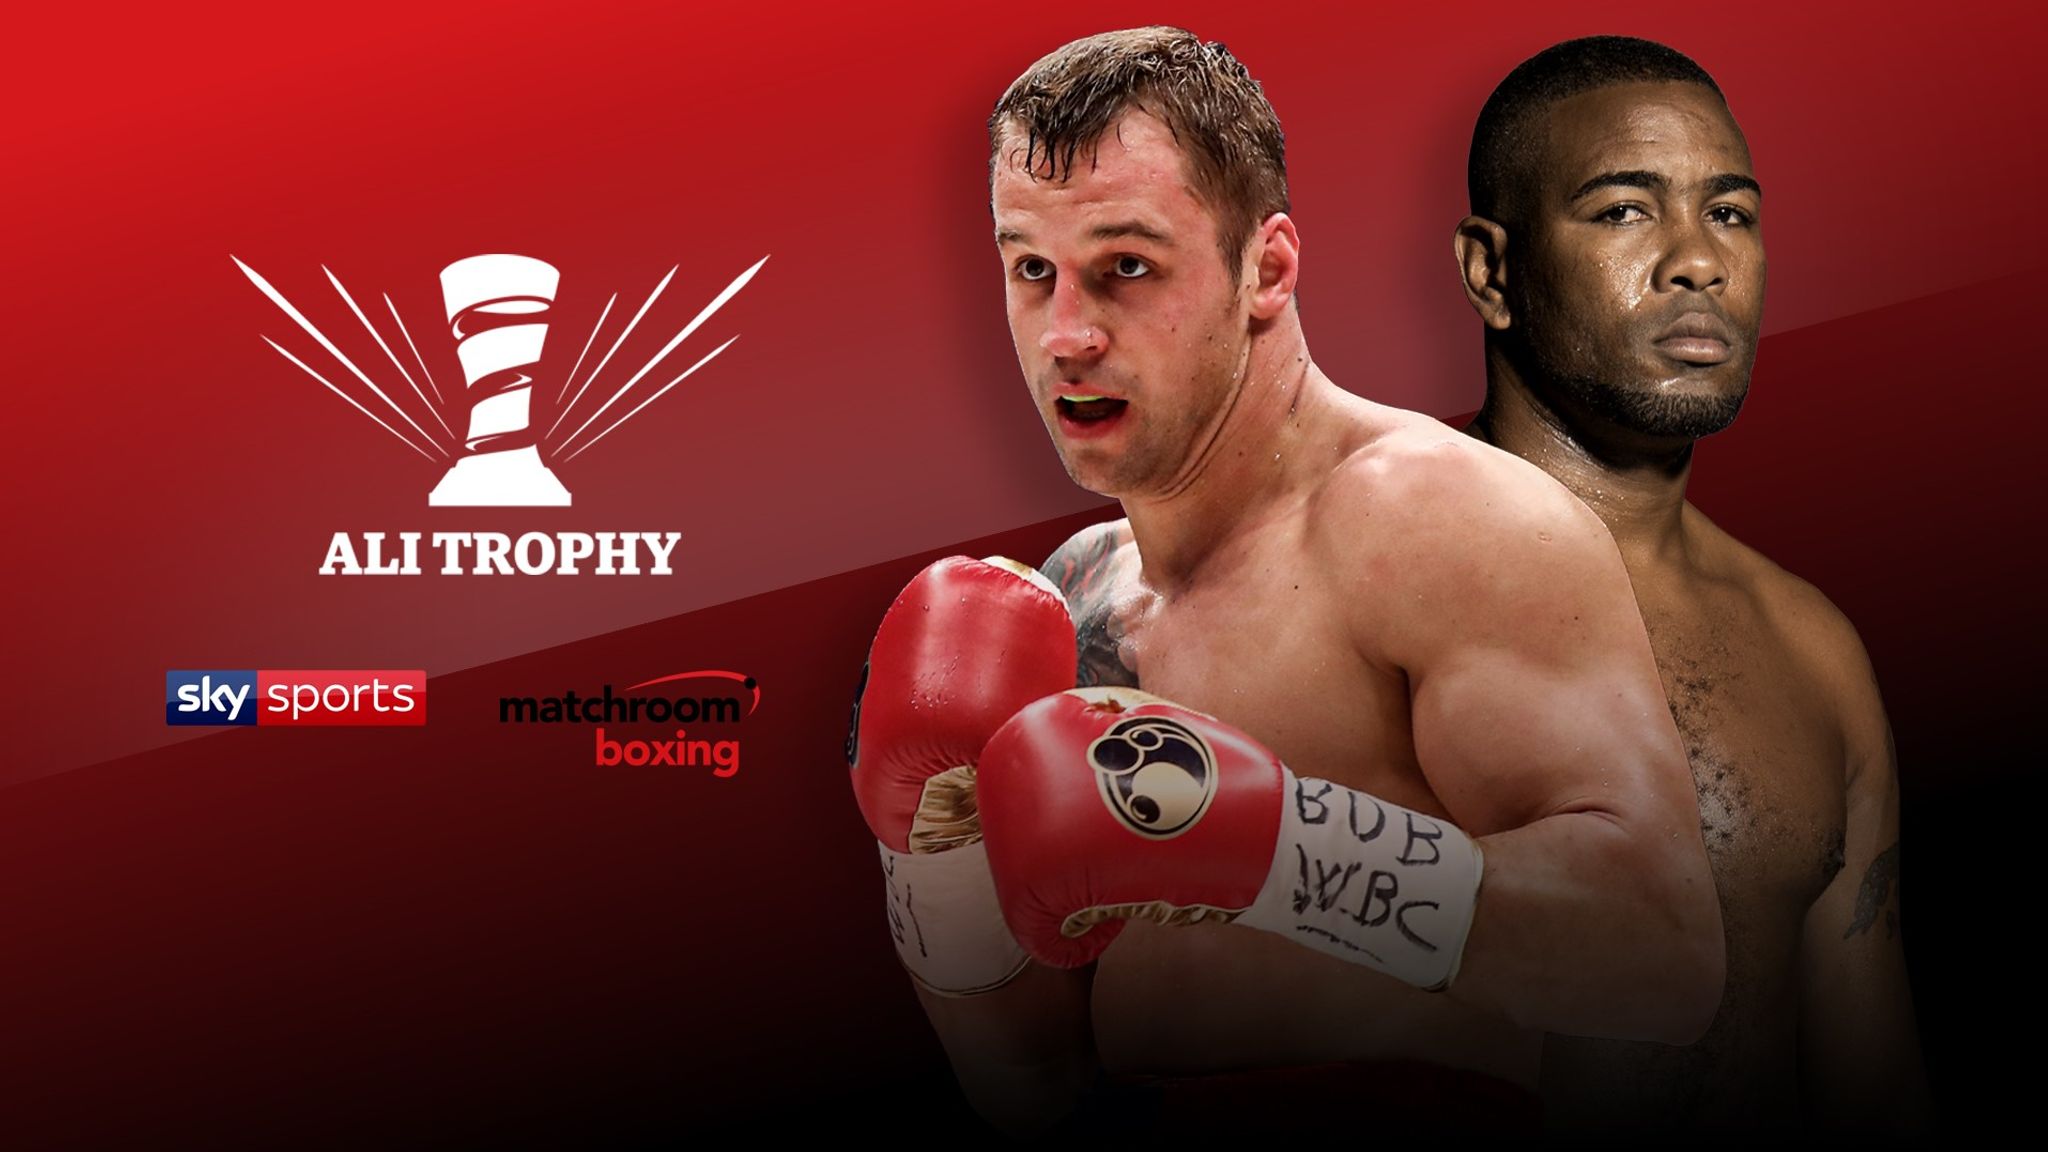 Mairis Briedis against Yuniel Dorticos in World Boxing Super Series final is live on Sky Sports Boxing News Sky Sports